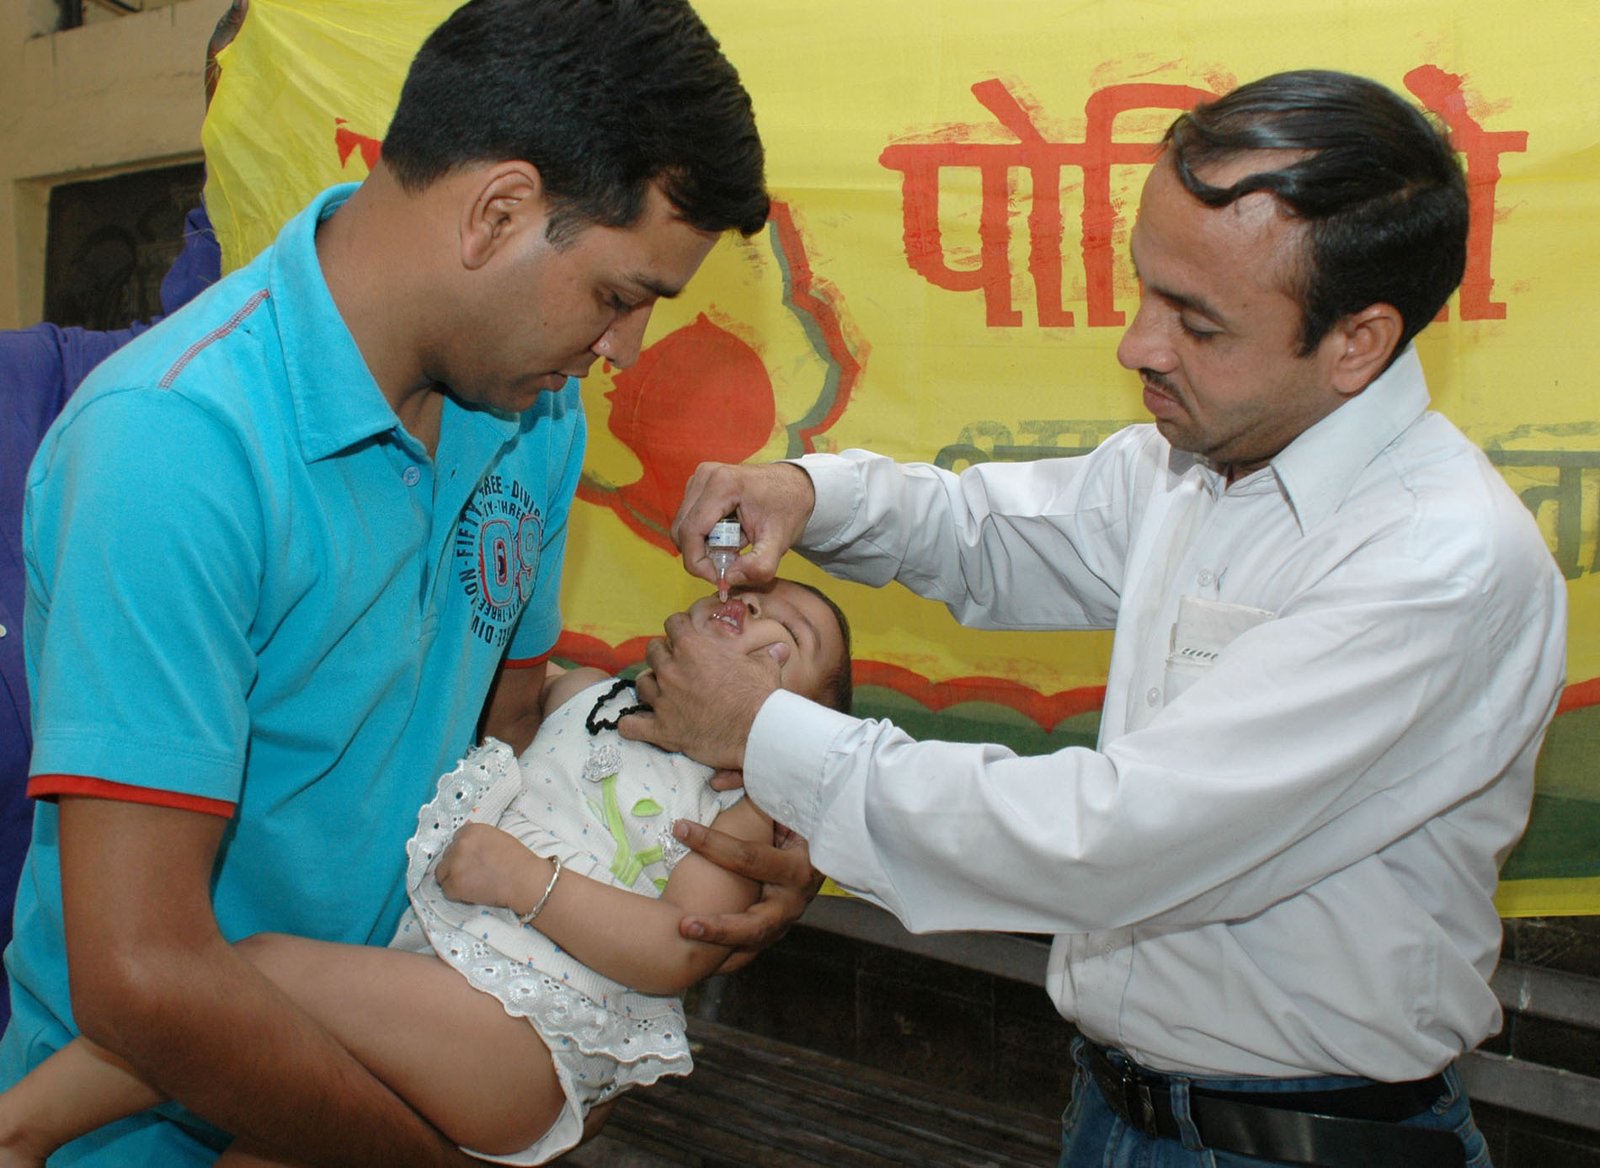 India has been already certified by WHO as Polio free. However, the immunization campaigns need to be effective to continue to prevent the virus' re-entry